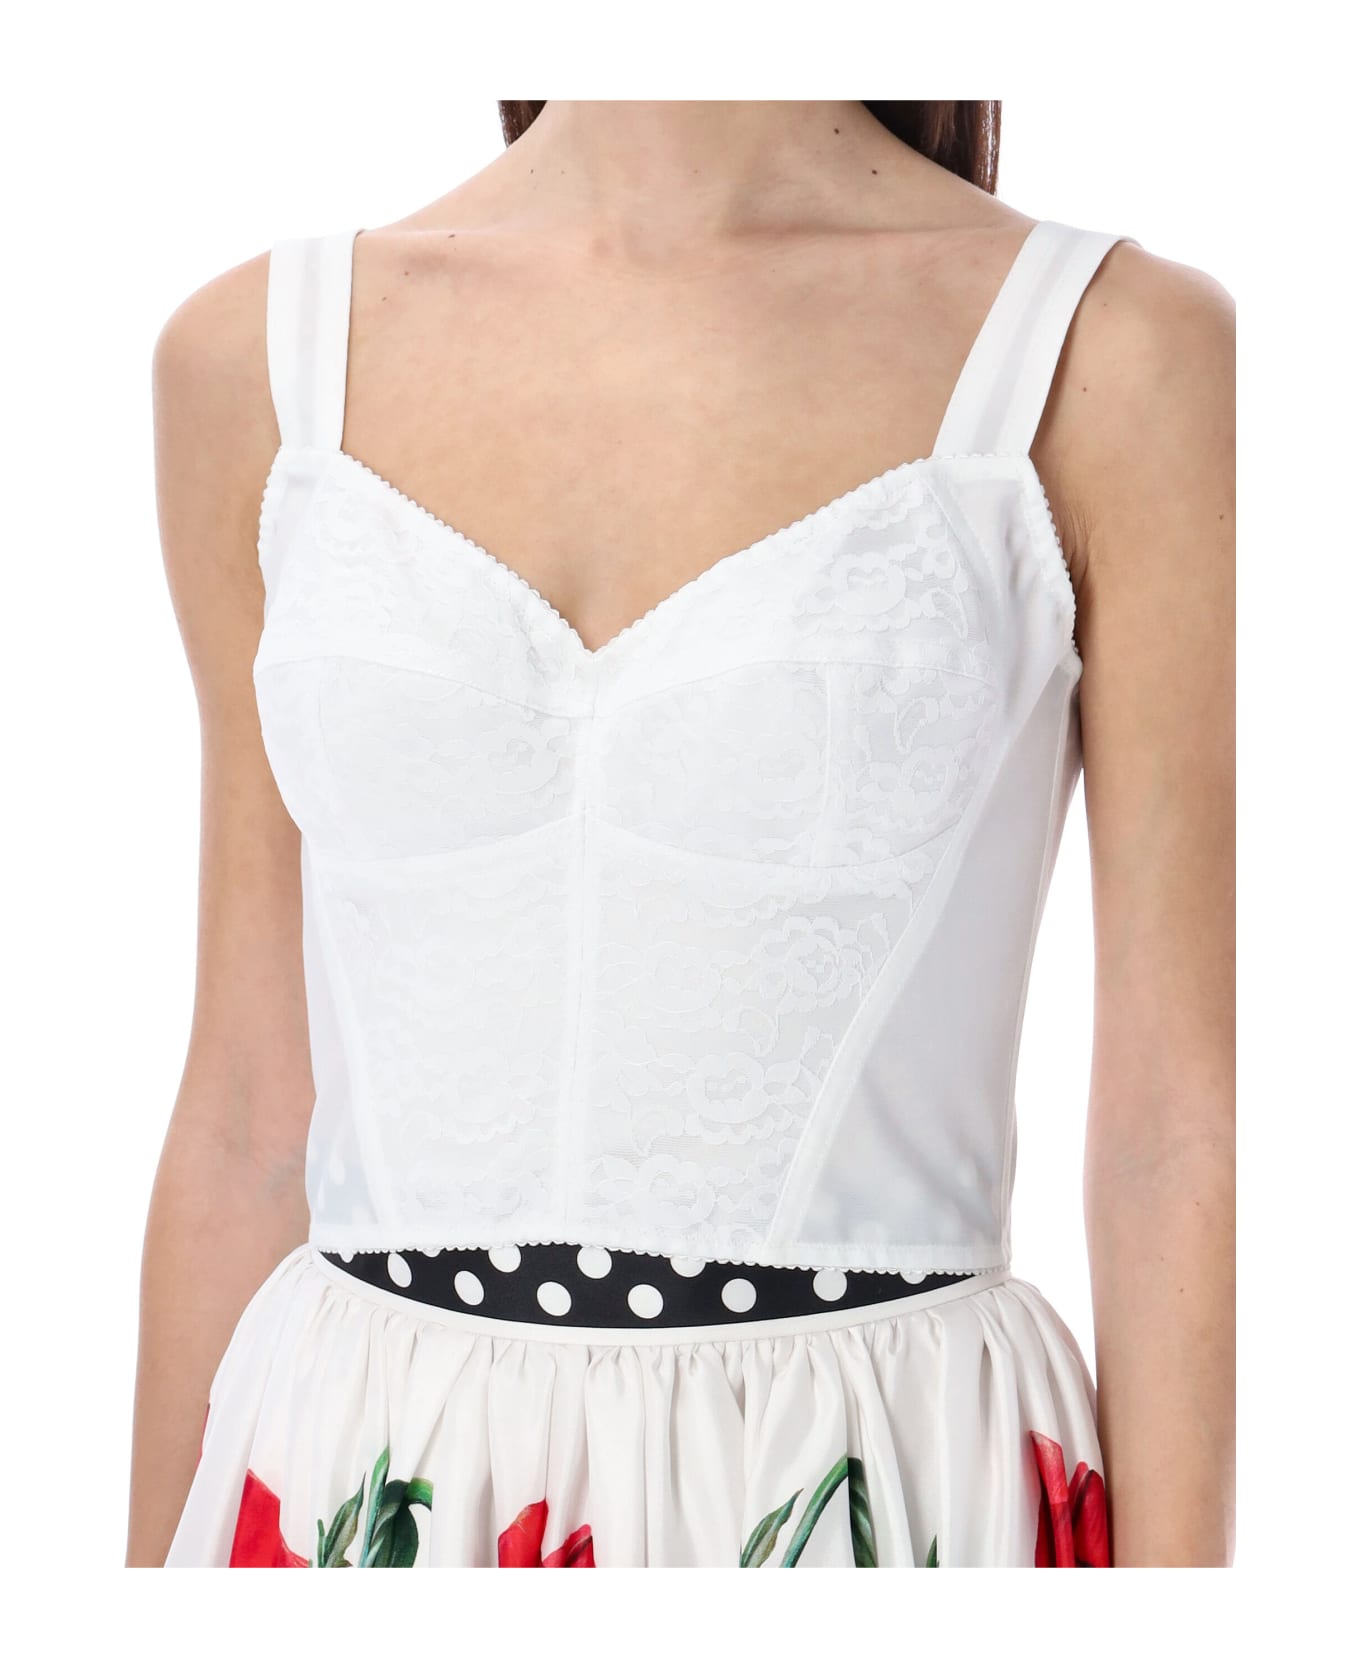 Dolce & Gabbana Lace And Jacquard Shaper Corset Bustier - WHITE